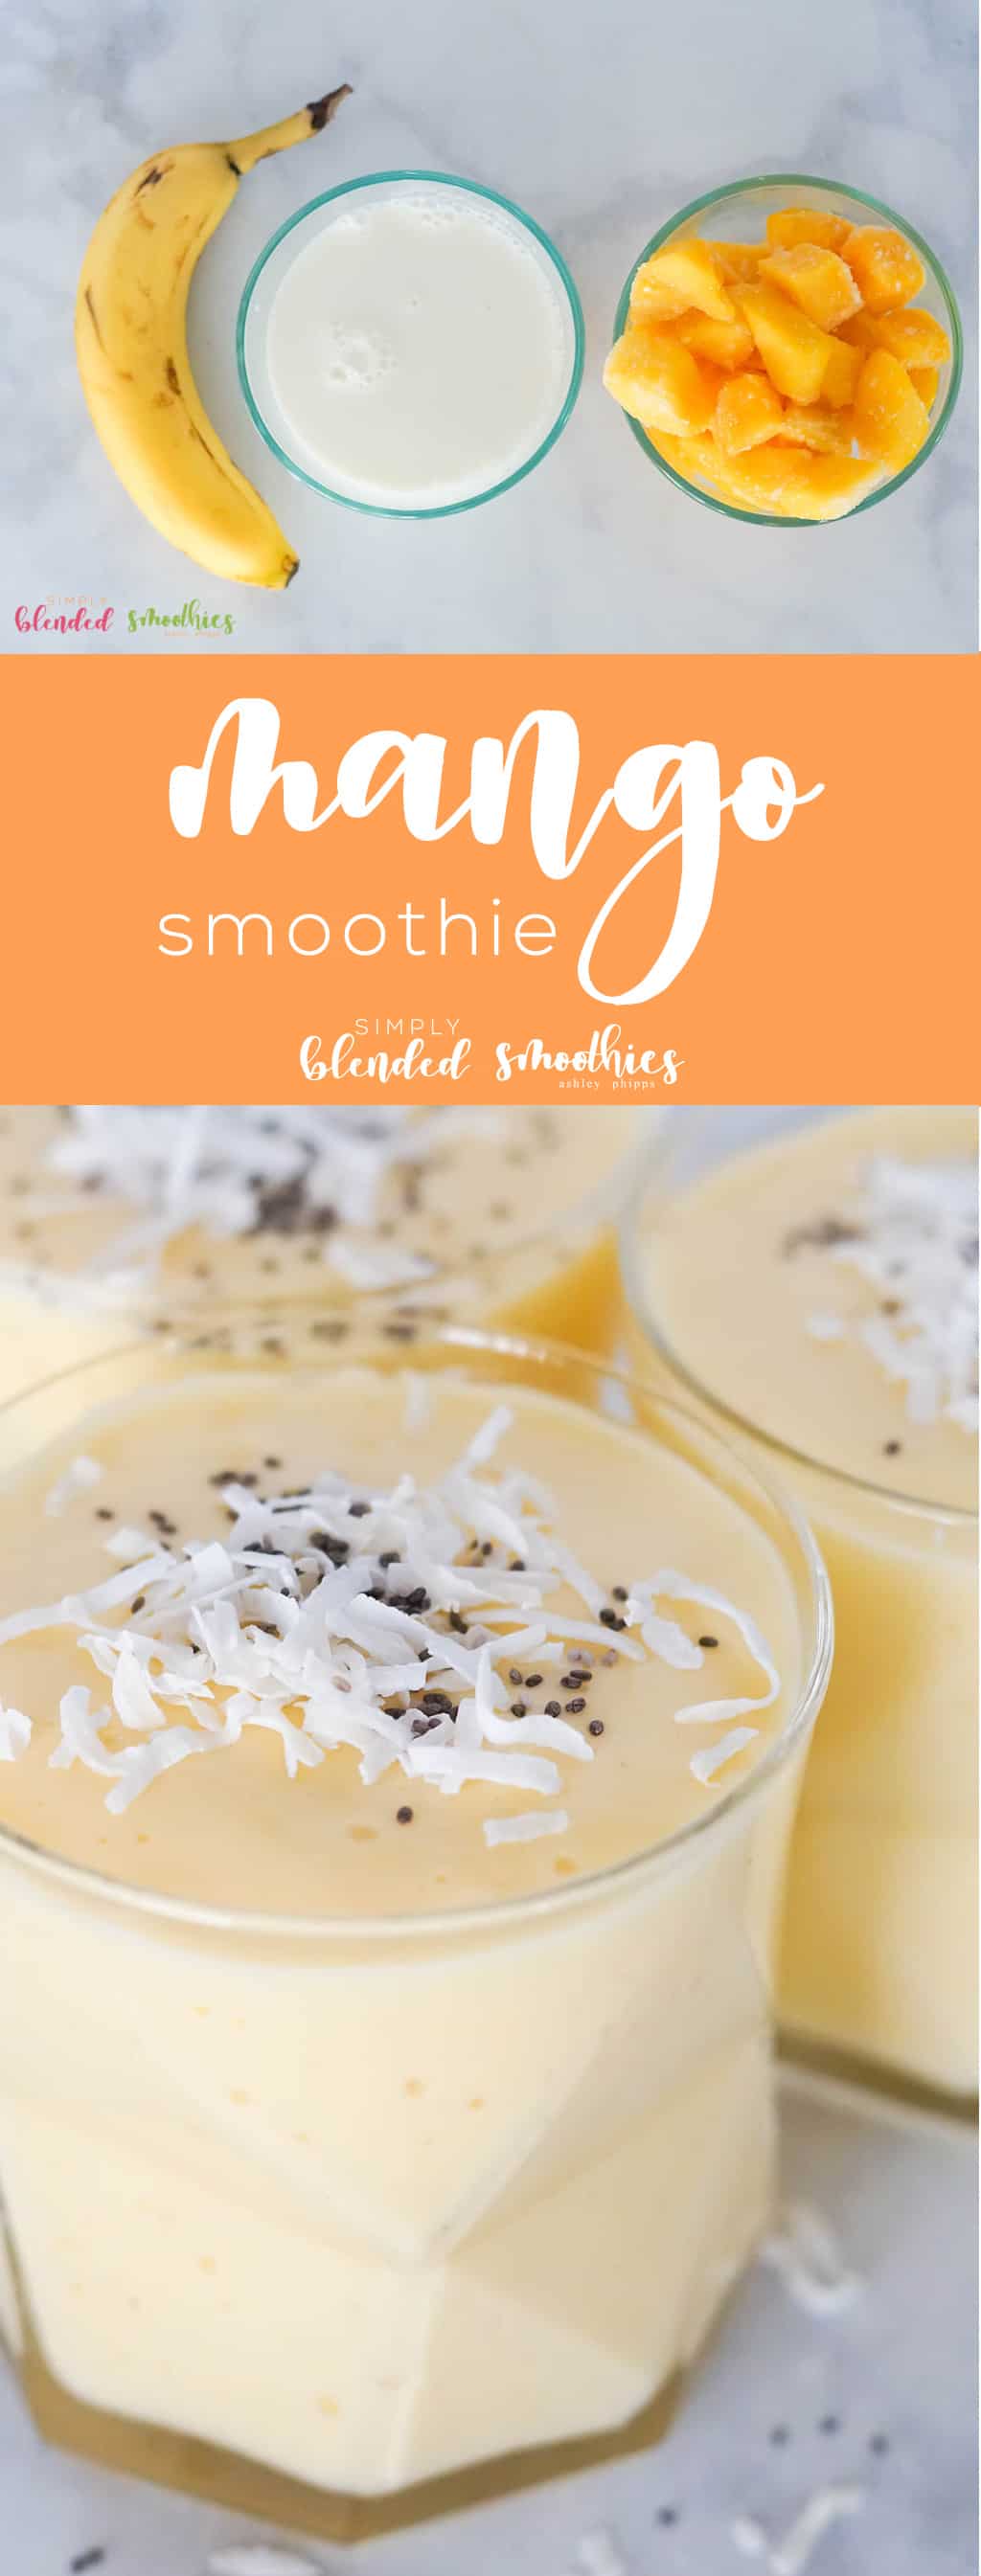 Mango Smoothie - This Healthy Mango Smoothie Recipe Is Full Of Tropical Flavor